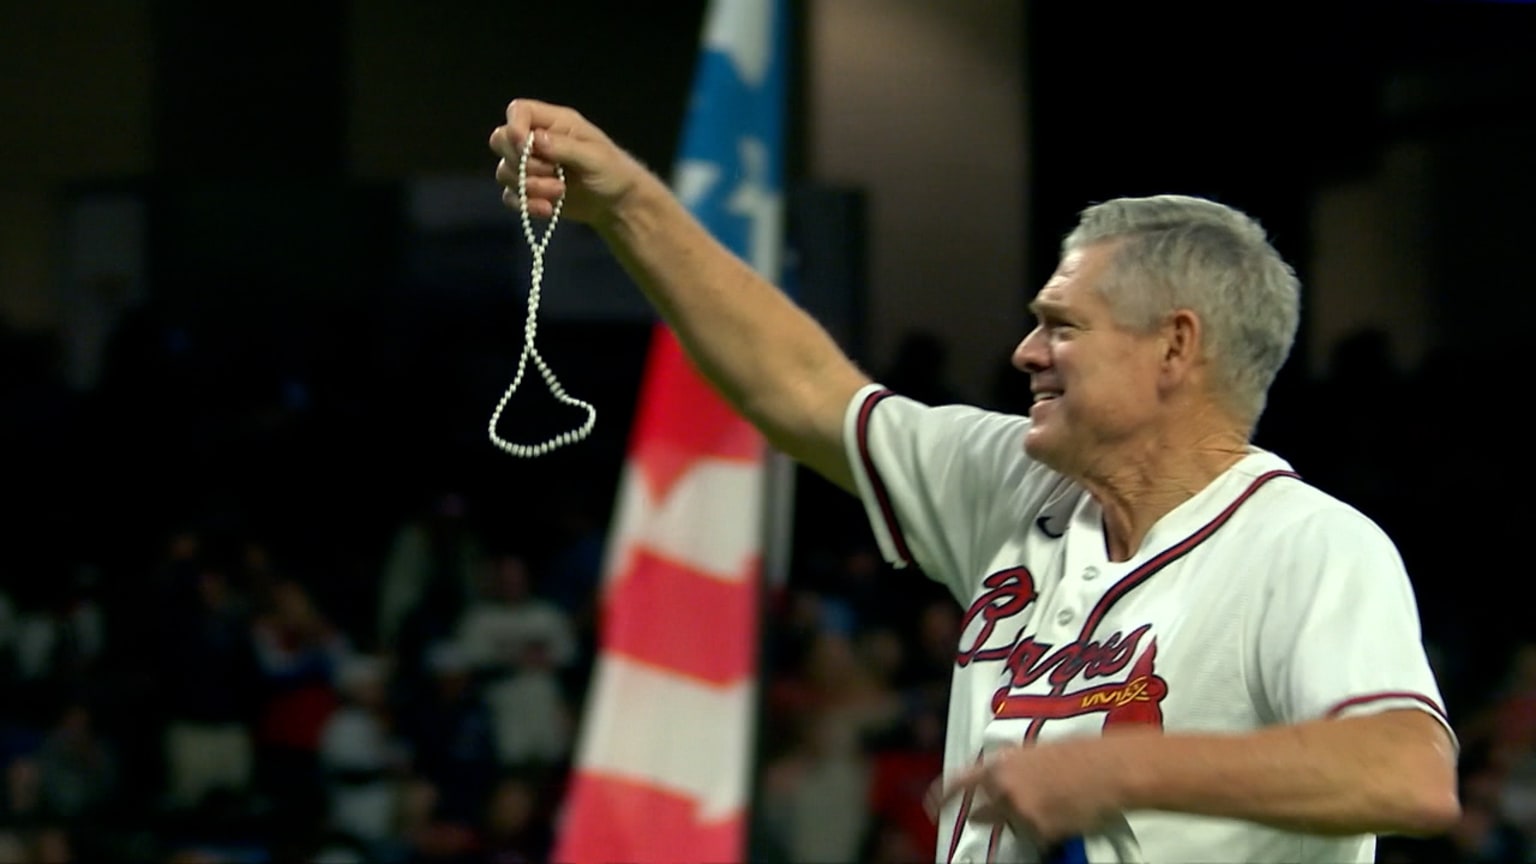 Dale Murphy throws first pitch, 10/17/2021